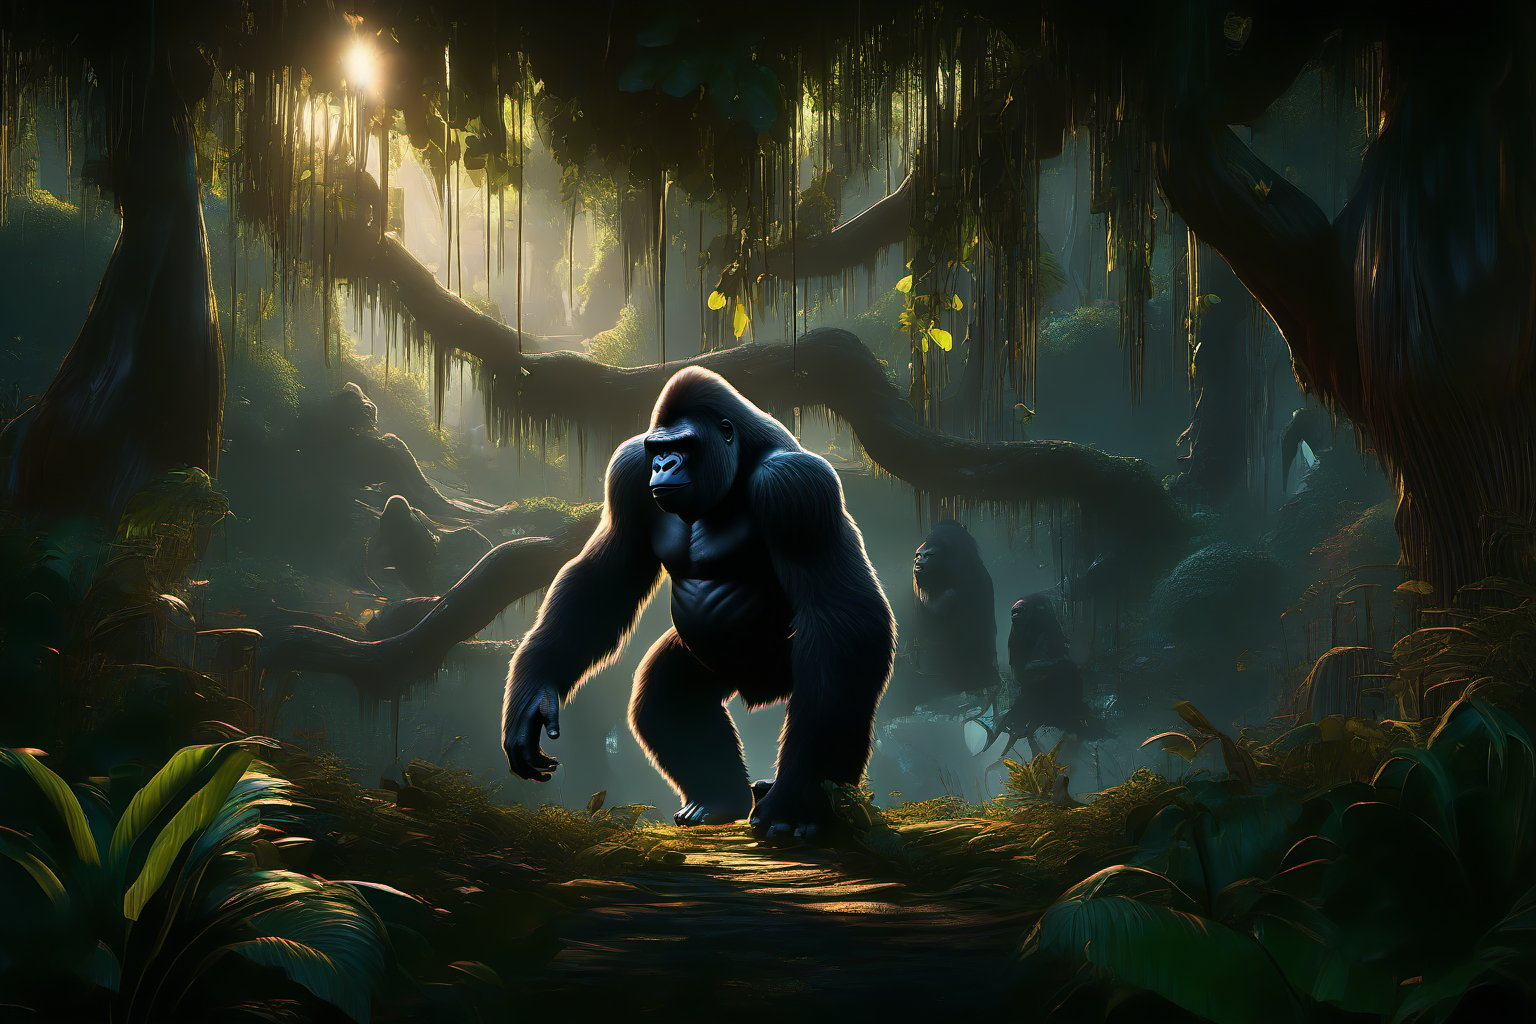 A majestic gorilla stands tall in the midst of a lush jungle, its Gigante-like stature commanding attention. The dense foliage provides a verdant backdrop for this powerful primate, its fur glistening in the dappled light filtering through the canopy above. The air is thick with humidity and the sounds of tropical life.